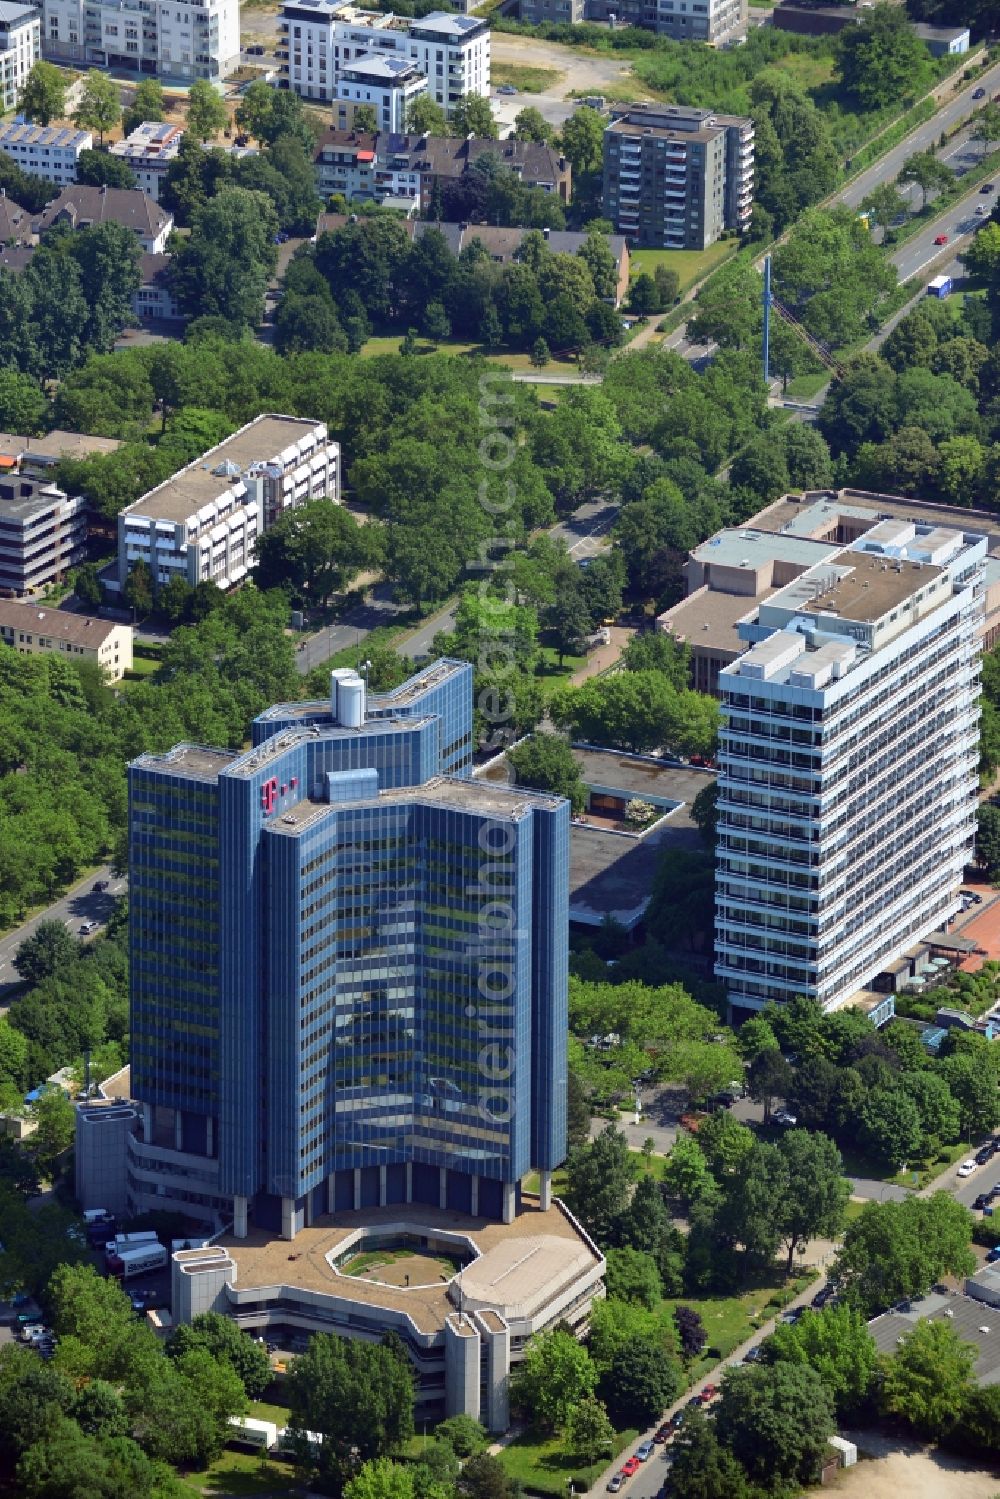 Dortmund from above - The Telekom Tower at the Rheinlanddamm in Dortmund in the state of Nordrhein-Westphalia. The office complex at the Westphalia Park was the tallest building in Dortmund until 2006. Originally built for the directorate of mail services, it is now headquarters for RWE distribution network provider Westnetz